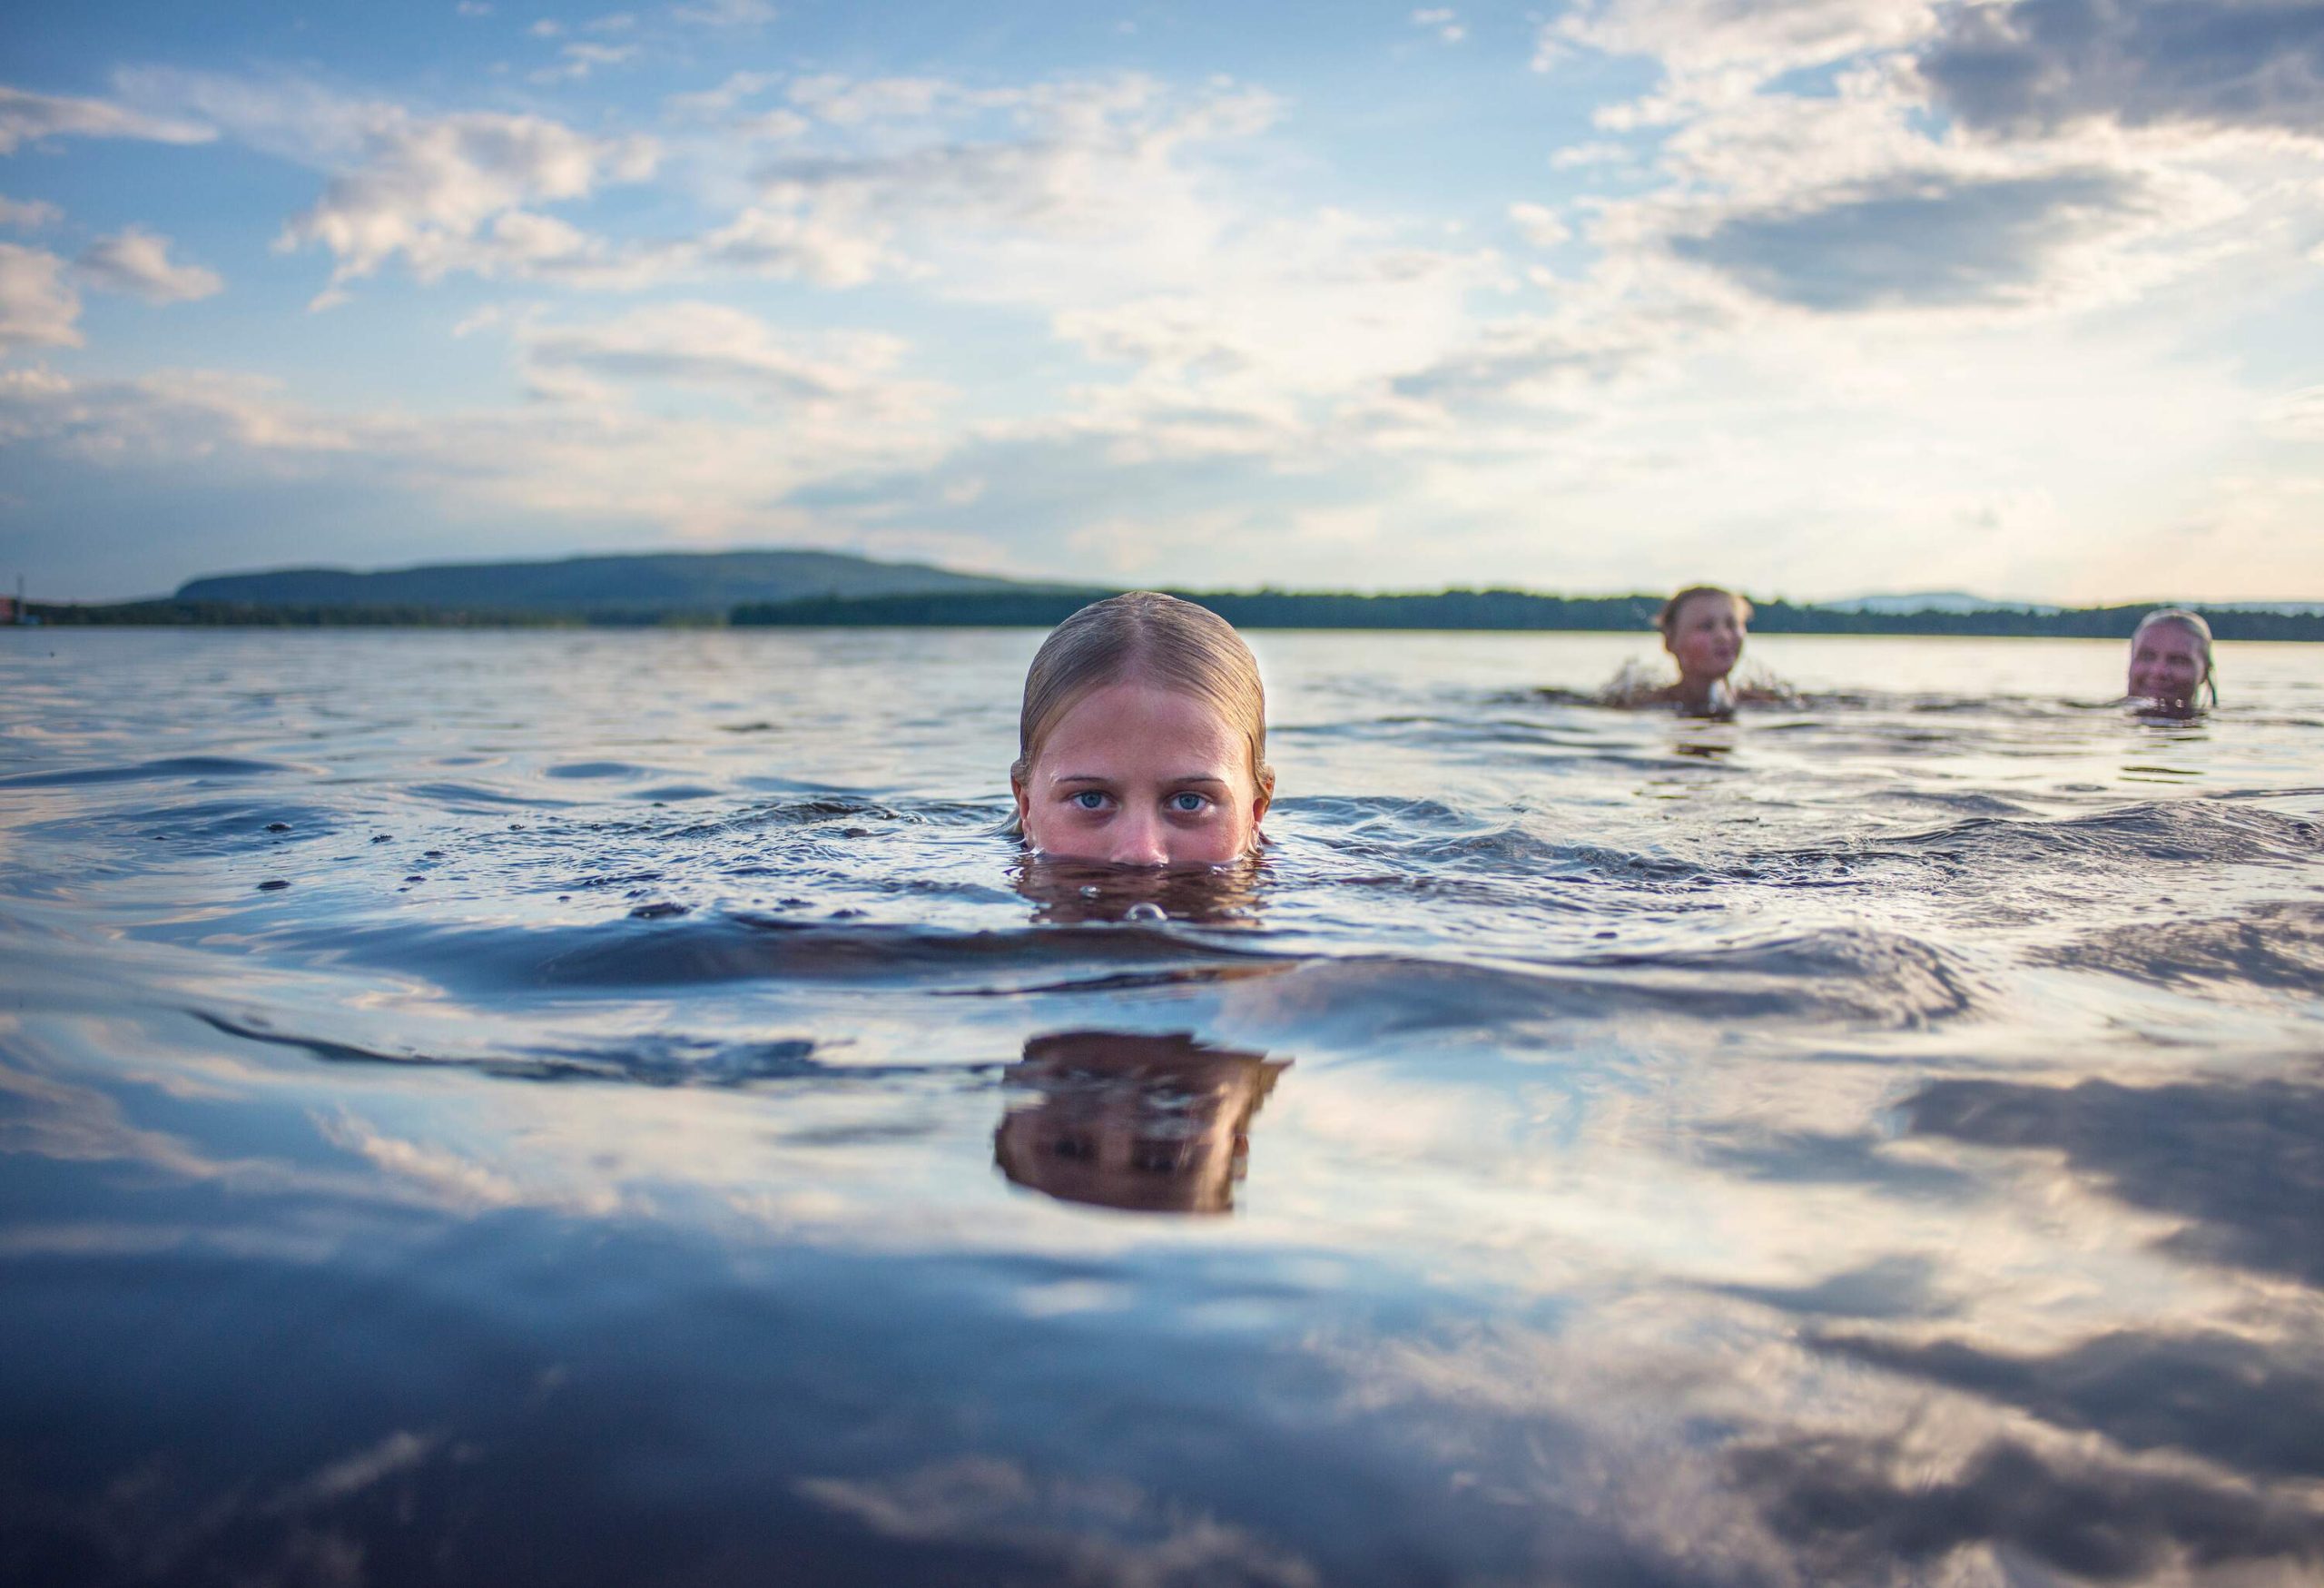 Three people swimming in a lake with their heads poking out of the water.